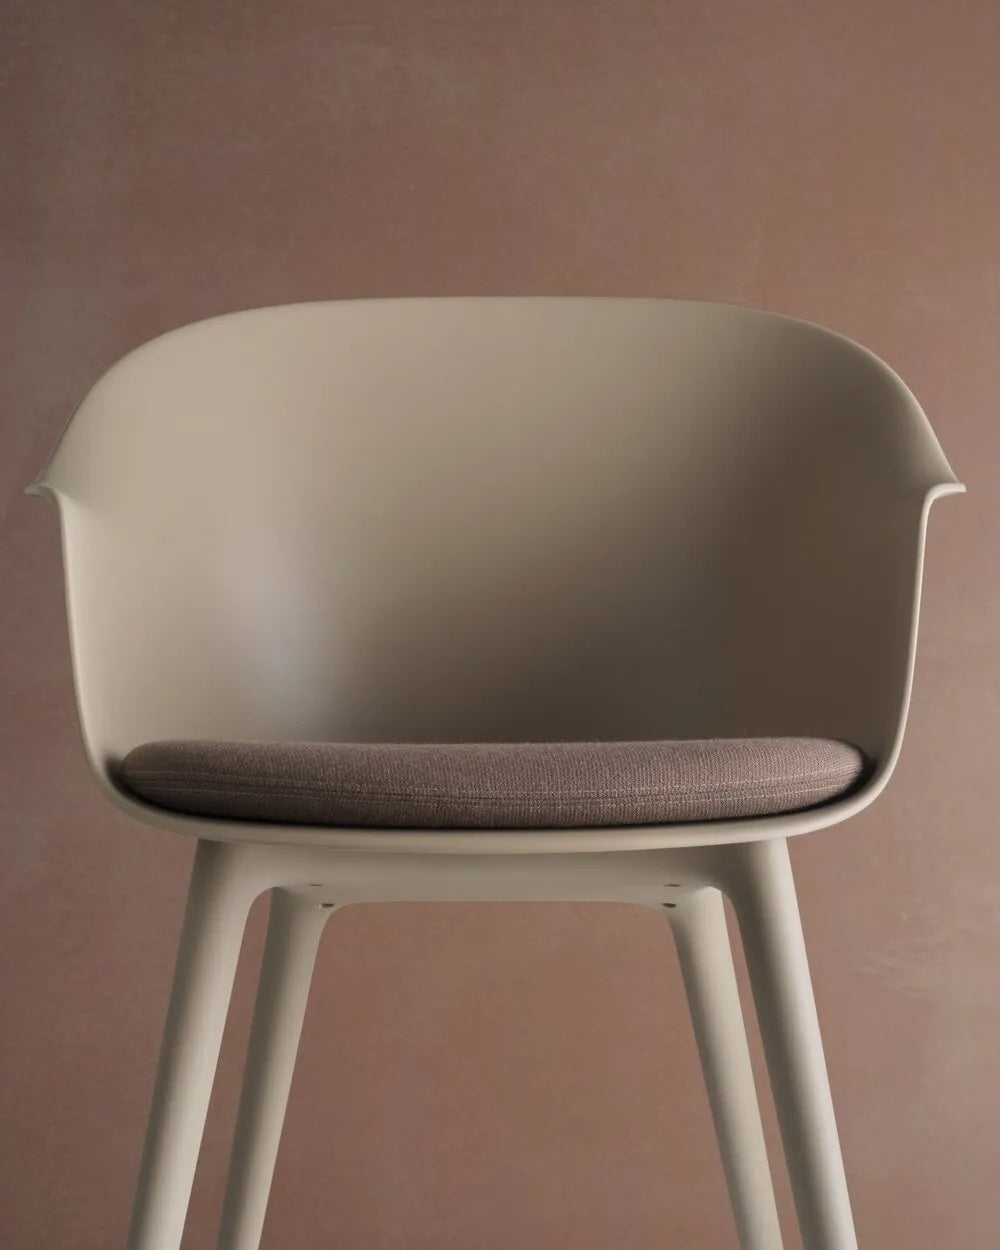 Bat Dining Chair - Plastic Base - With Cushion by Gubi by Gubi